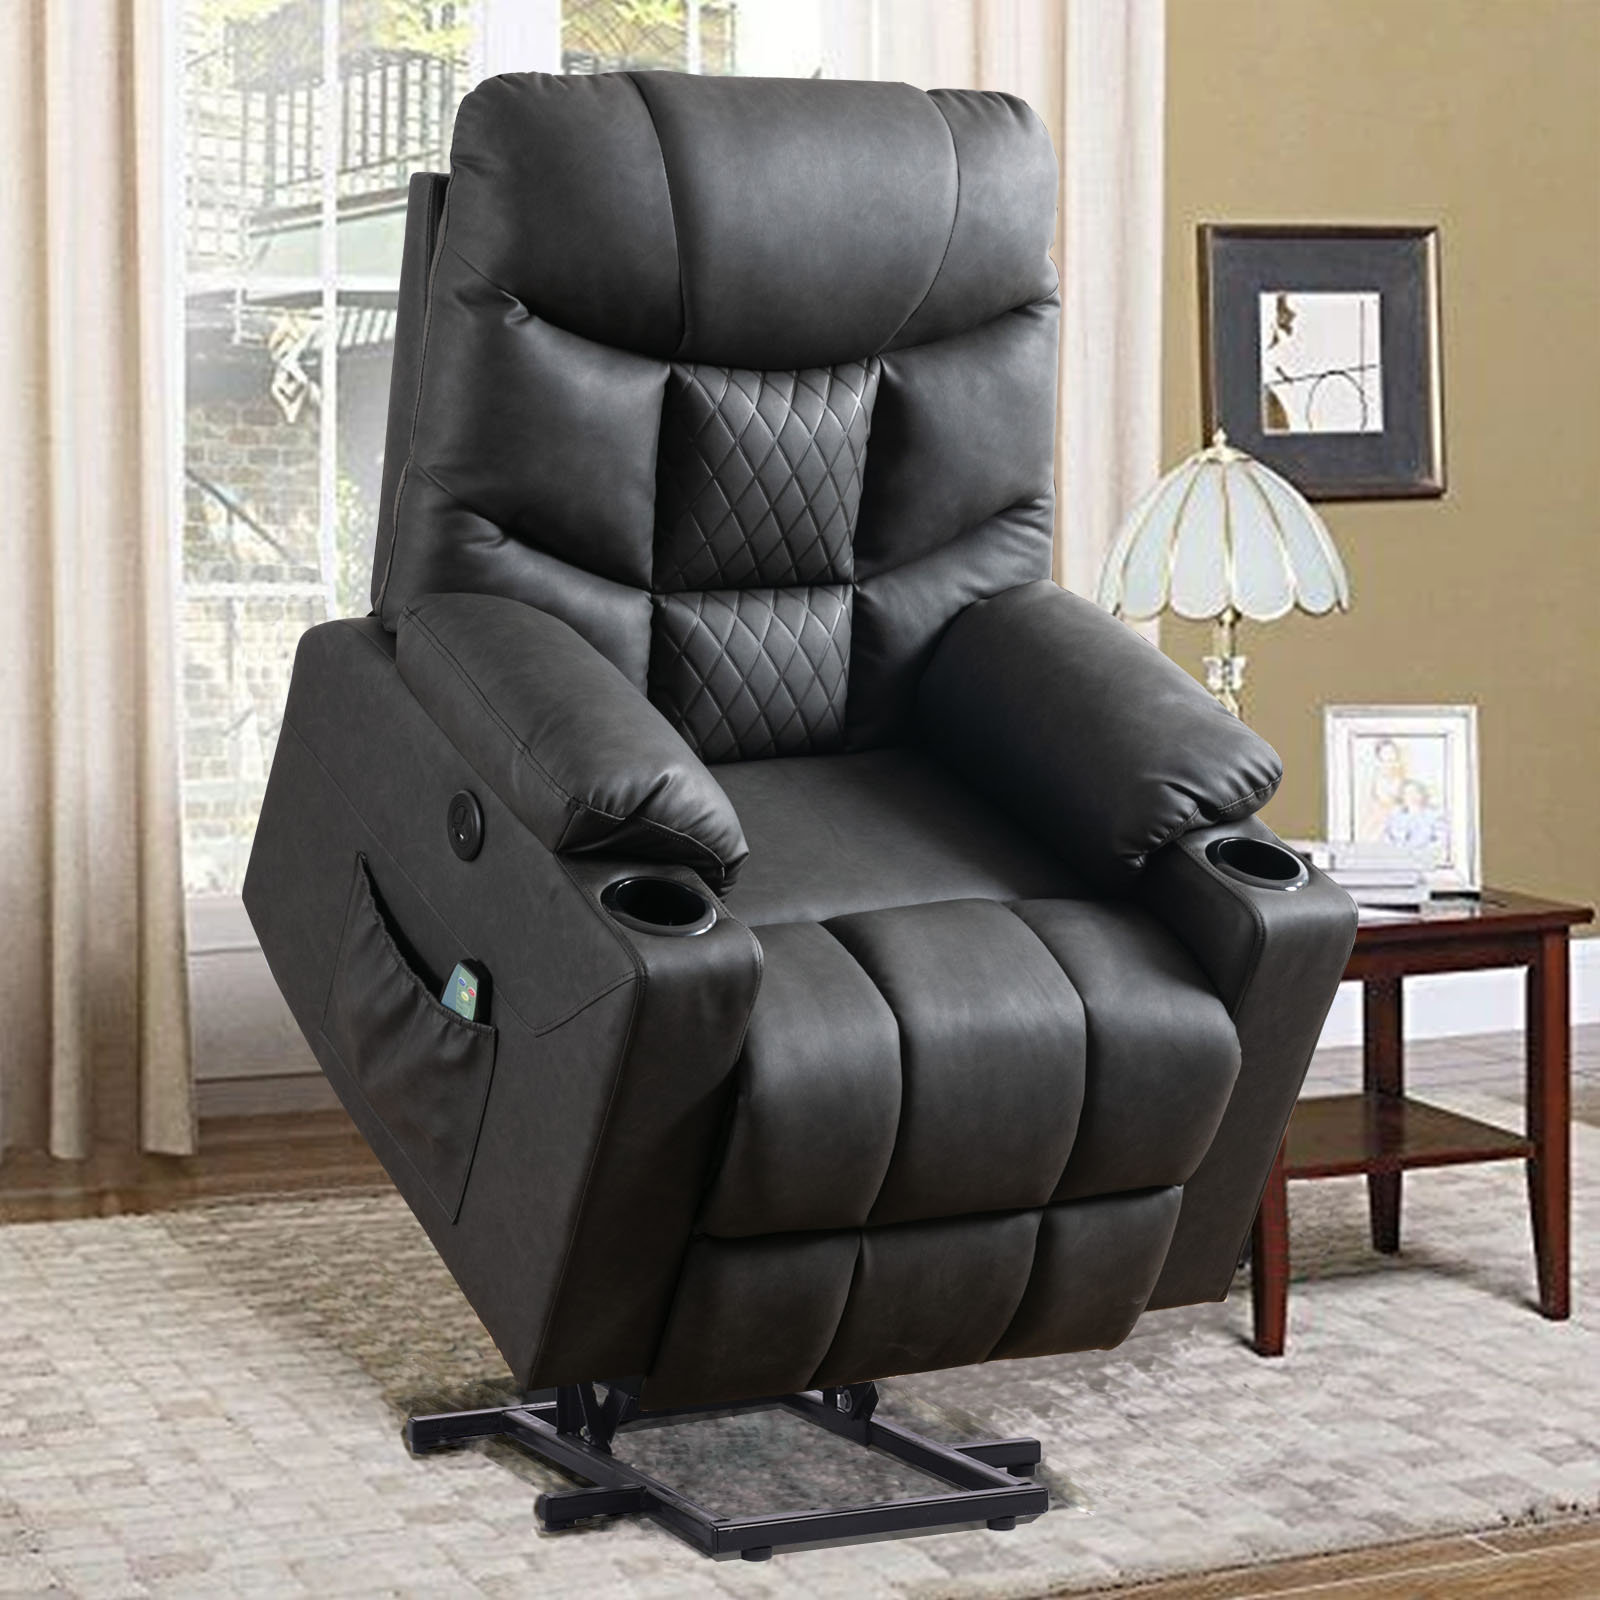 Power Lift Chair Recliner, Electric for Elderly, with Heating Vibration Massage, Remote Control Latitude Run Body Fabric: Black Faux Leather